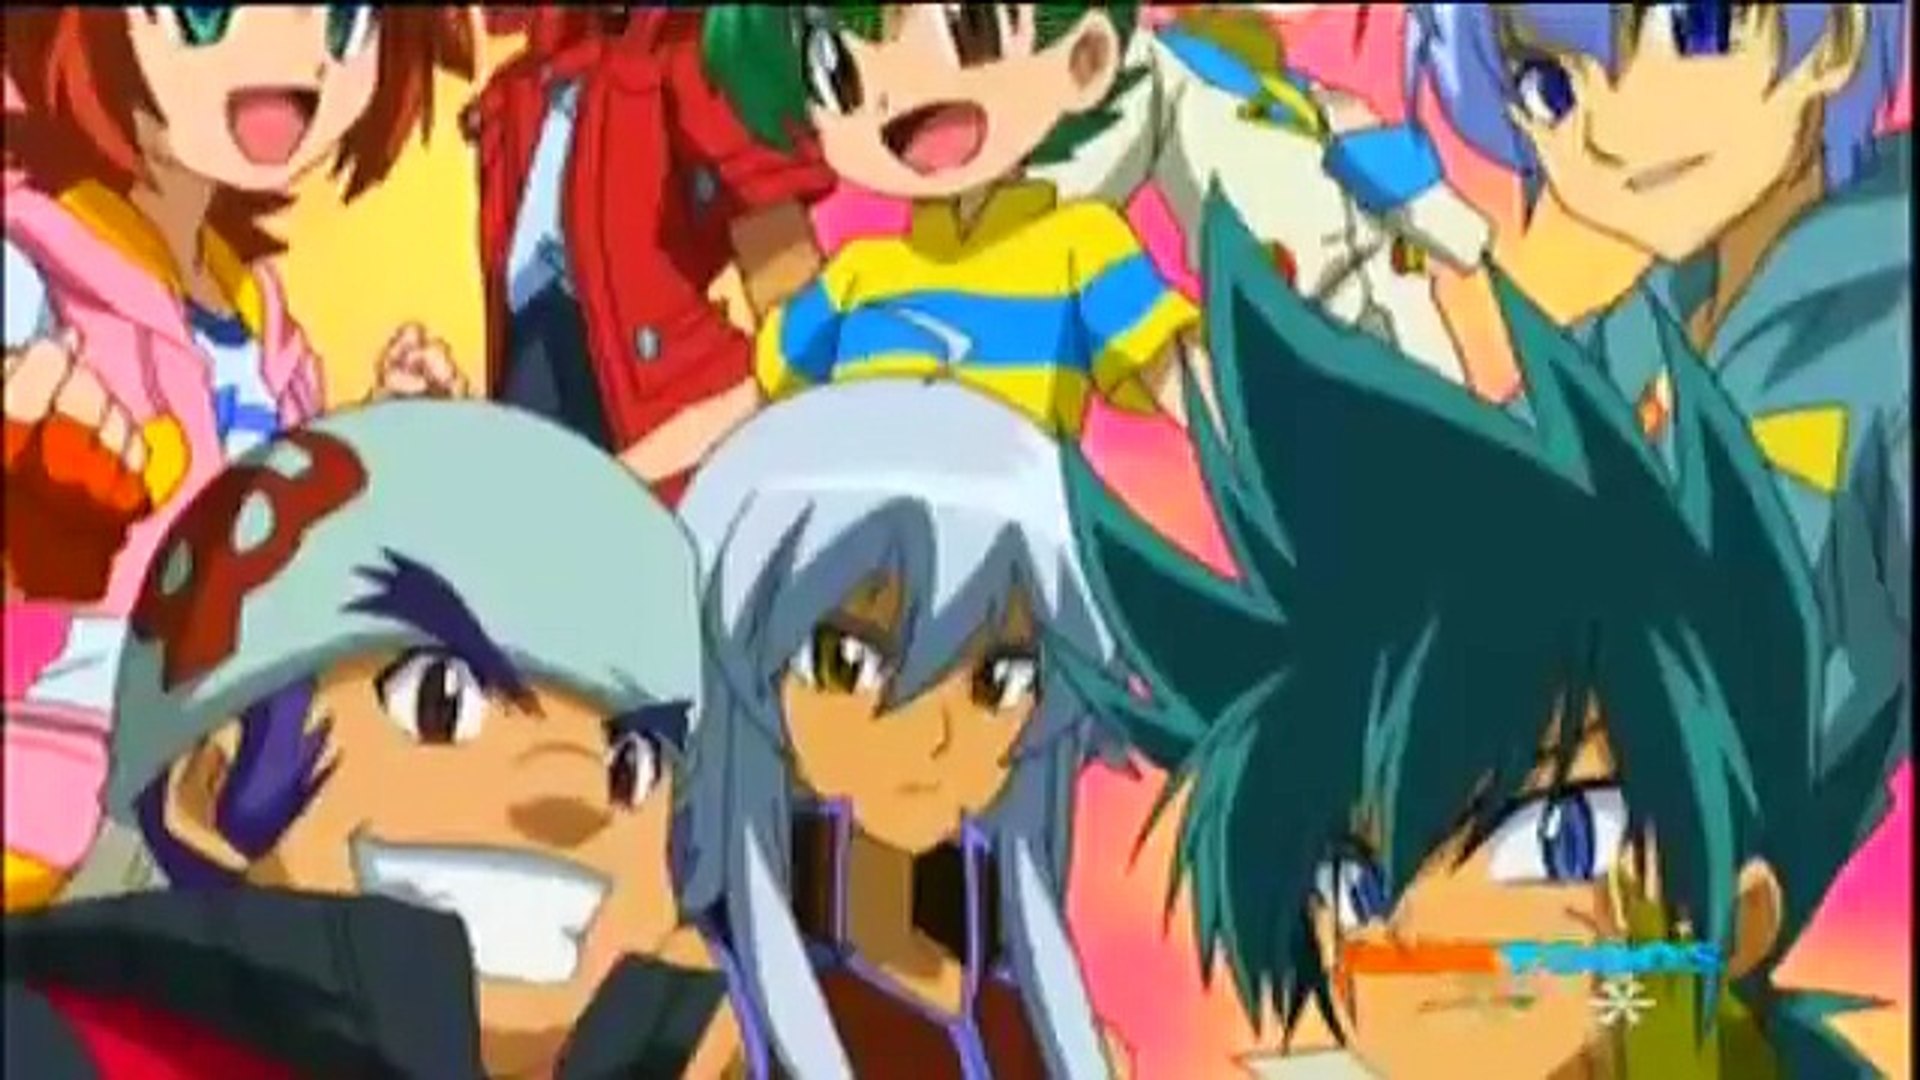 All beyblade metal fusion characters